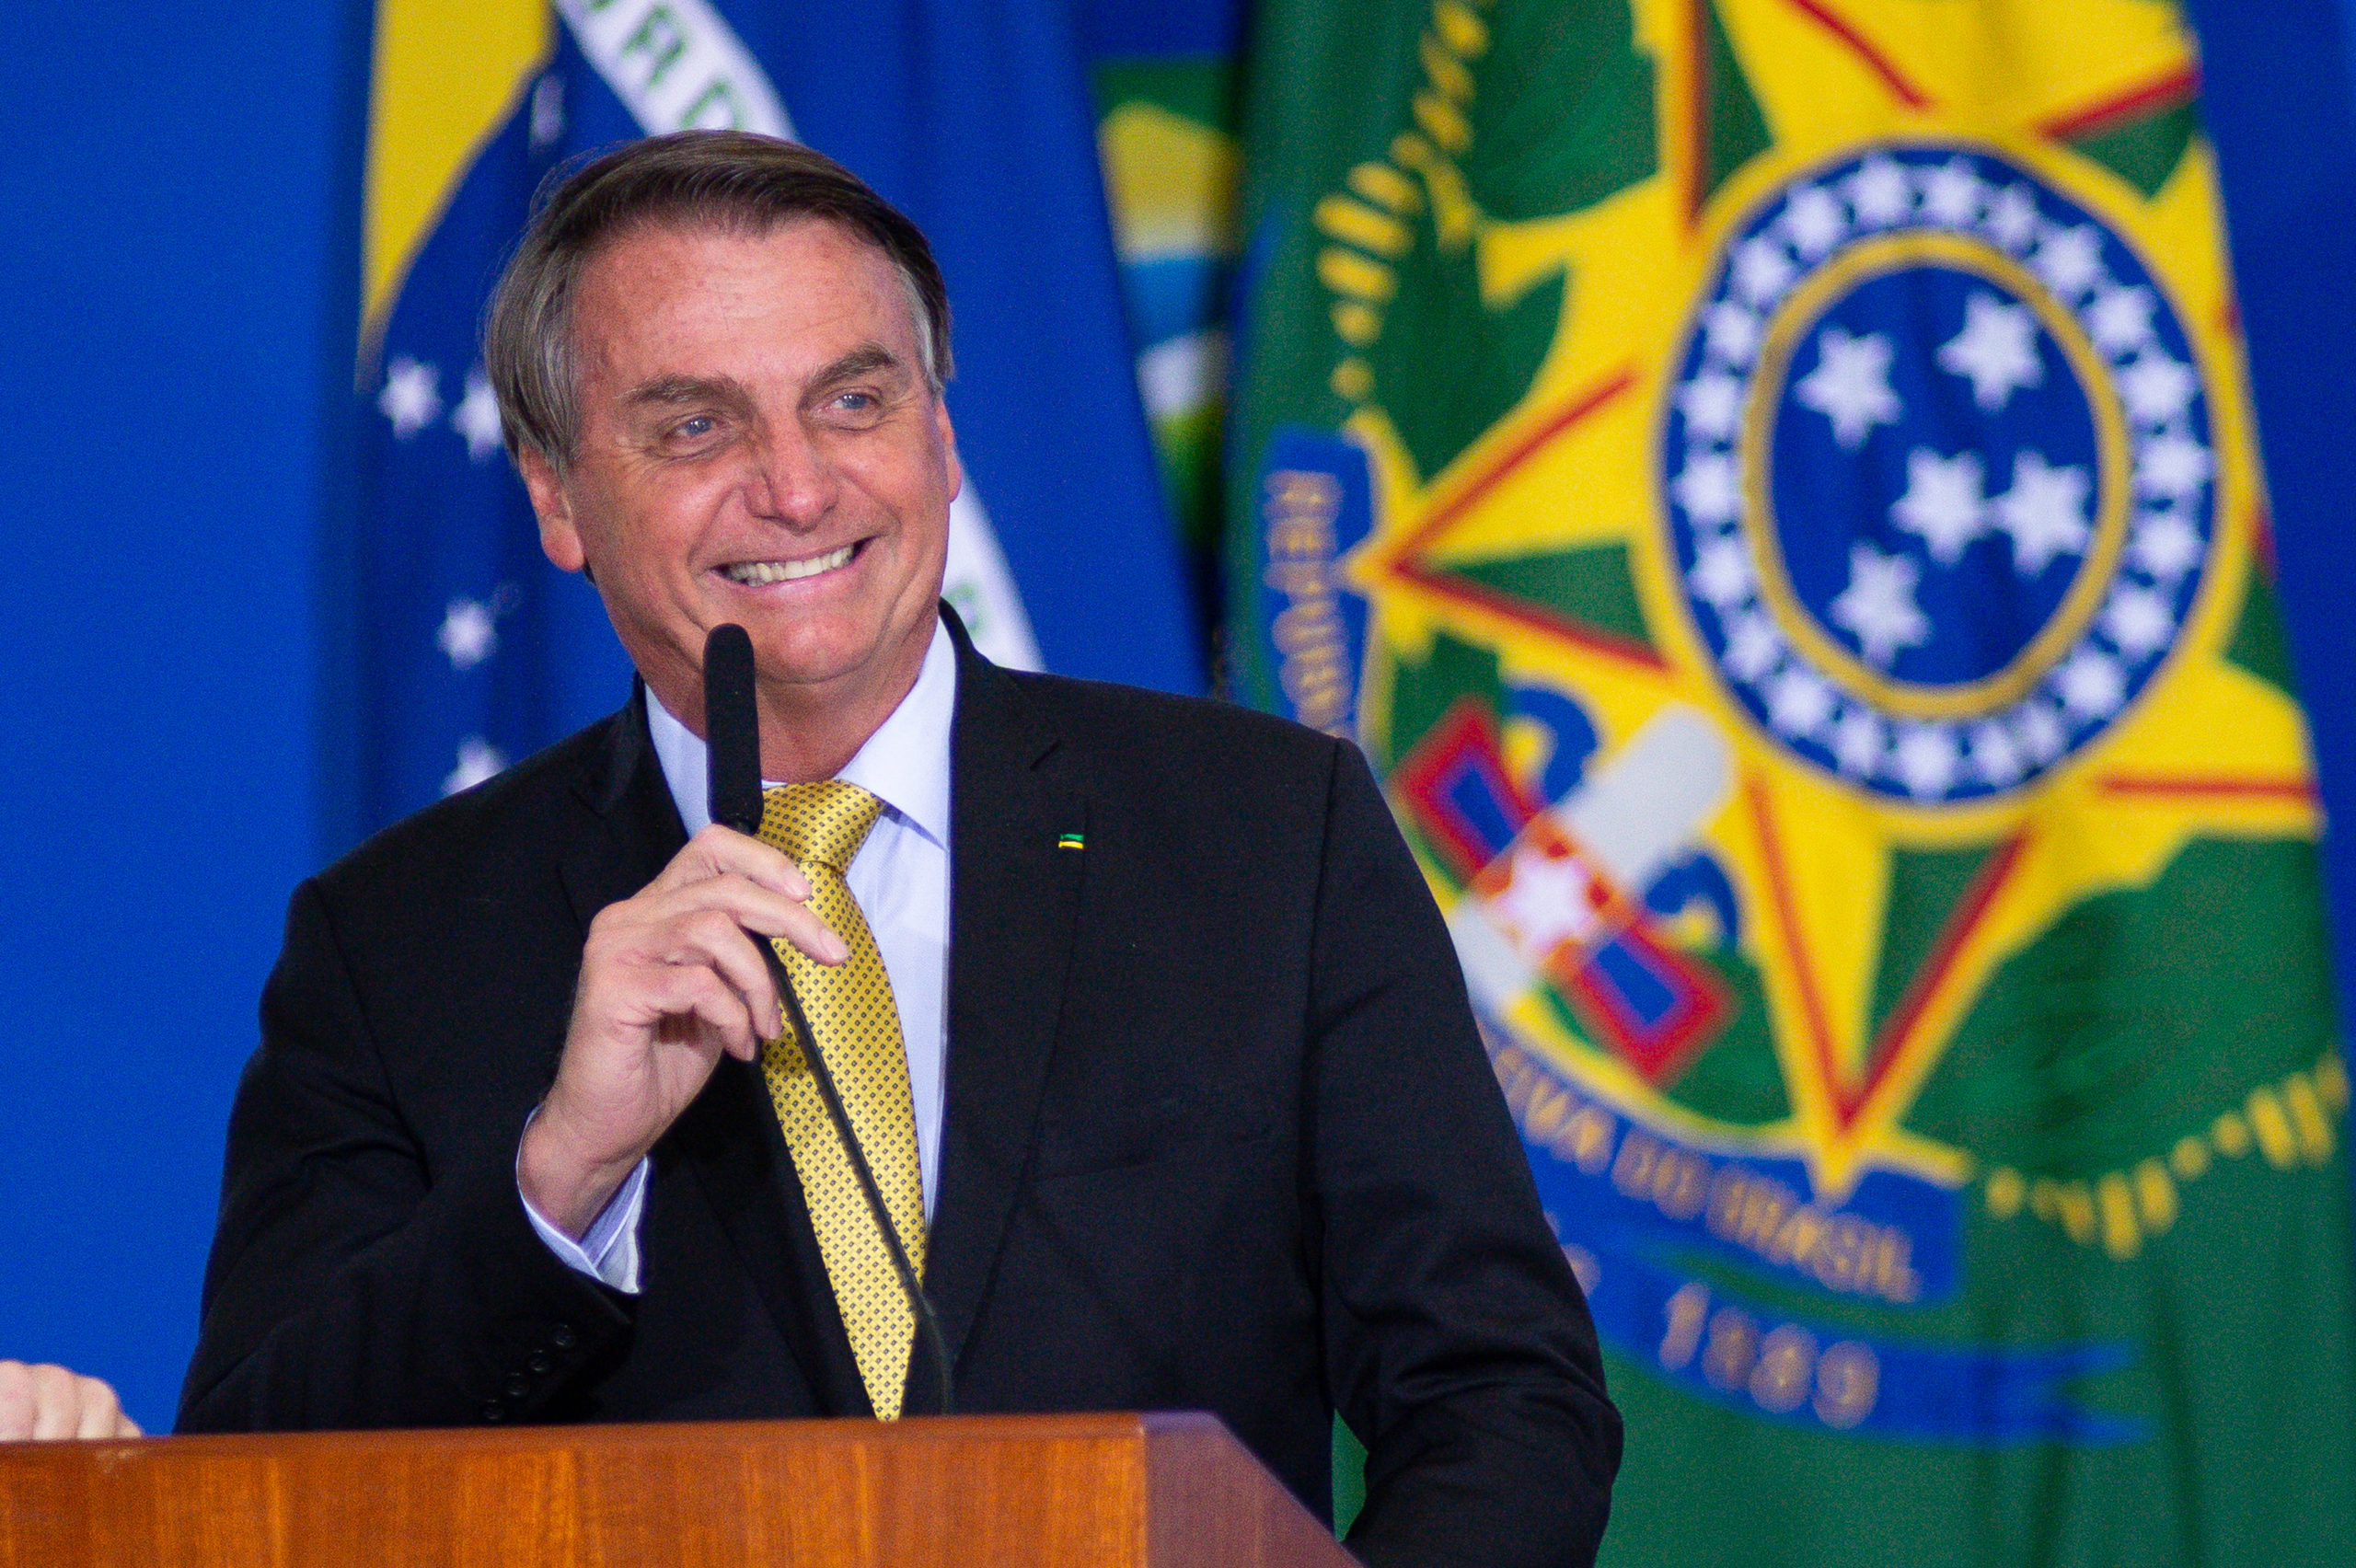 President of Brazil Jair Bolsonaro smiles during an event to launch a new register for professional workers of the fish industry at Planalto Government Palace on June 29, 2021 in Brasilia, Brazil. (Photo by Andressa Anholete/Getty Images)